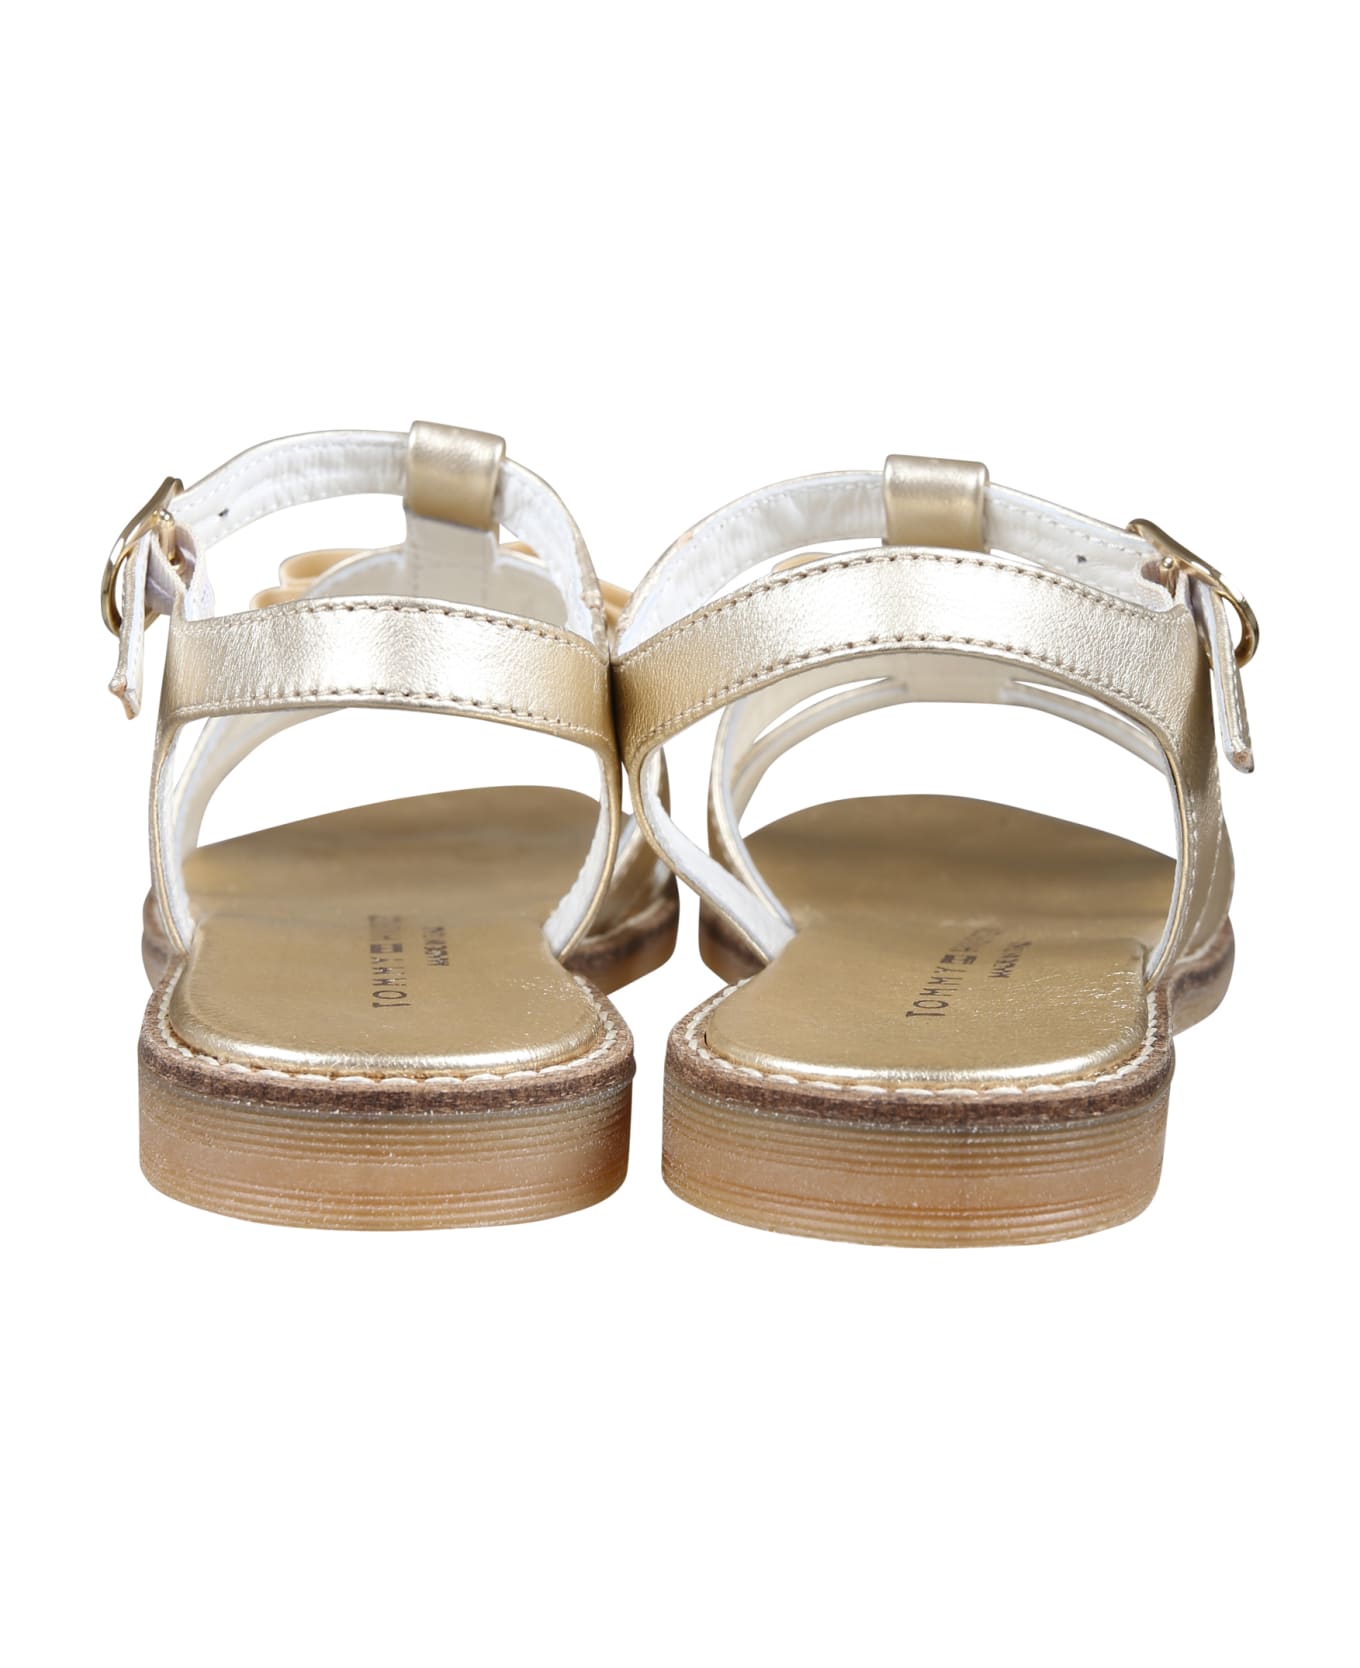 Tommy Hilfiger Gold Sandals For Girl With Bow And Logo - Gold